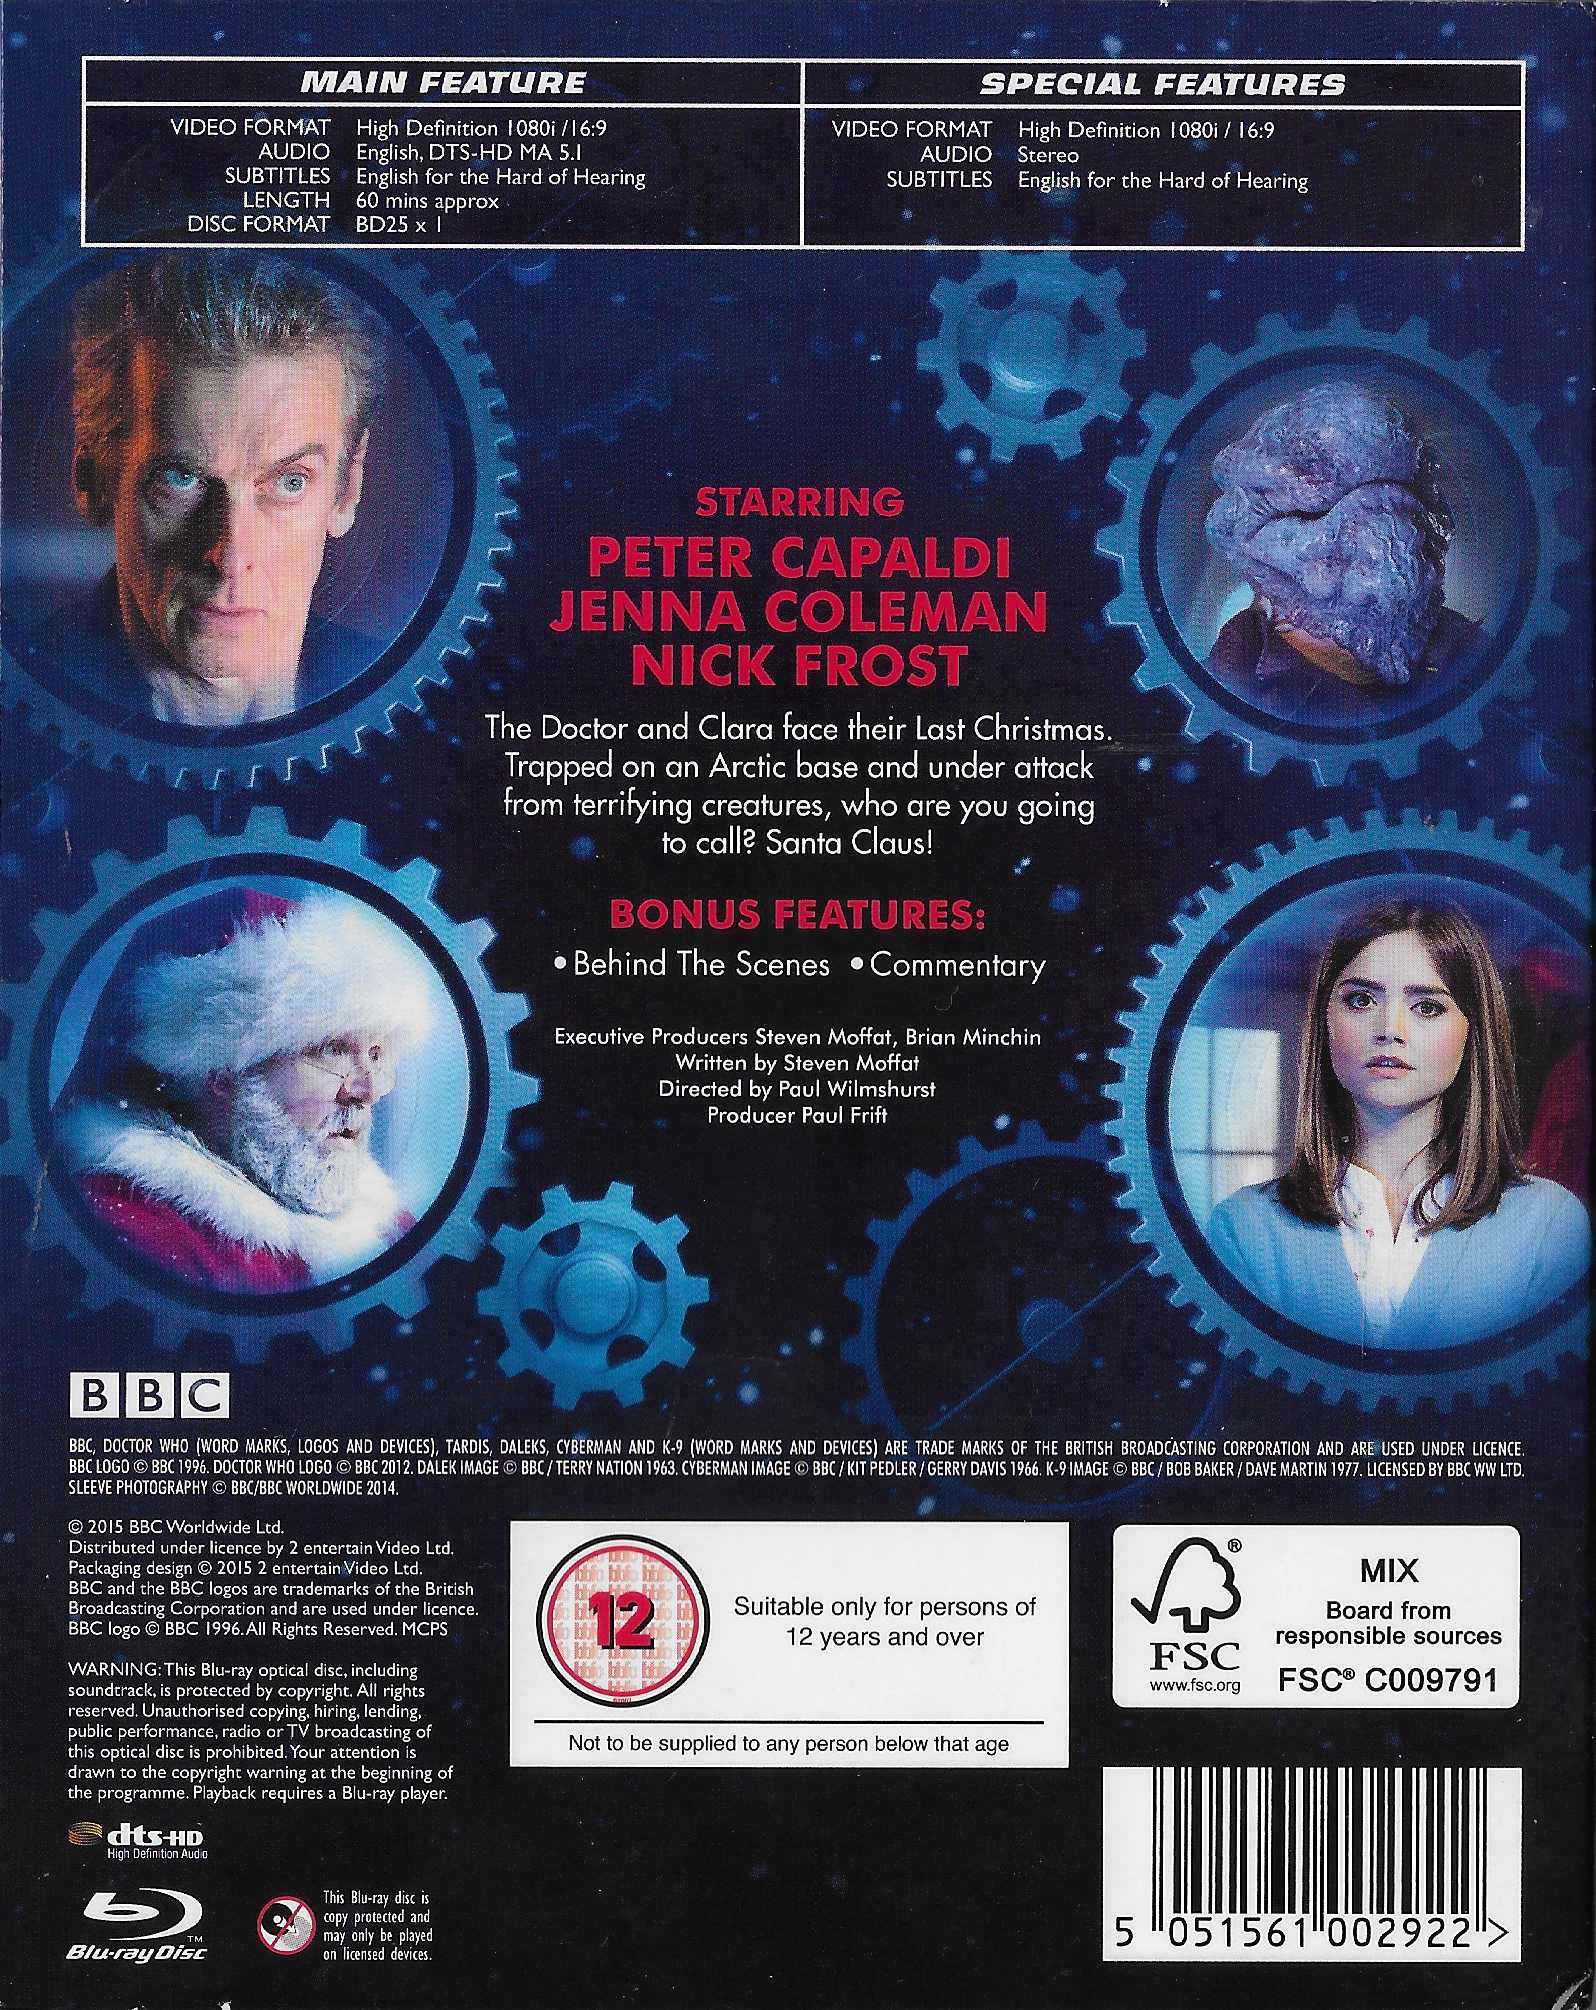 Picture of BBCBD 0292 Doctor Who - Last Christmas by artist Steven Moffat from the BBC records and Tapes library